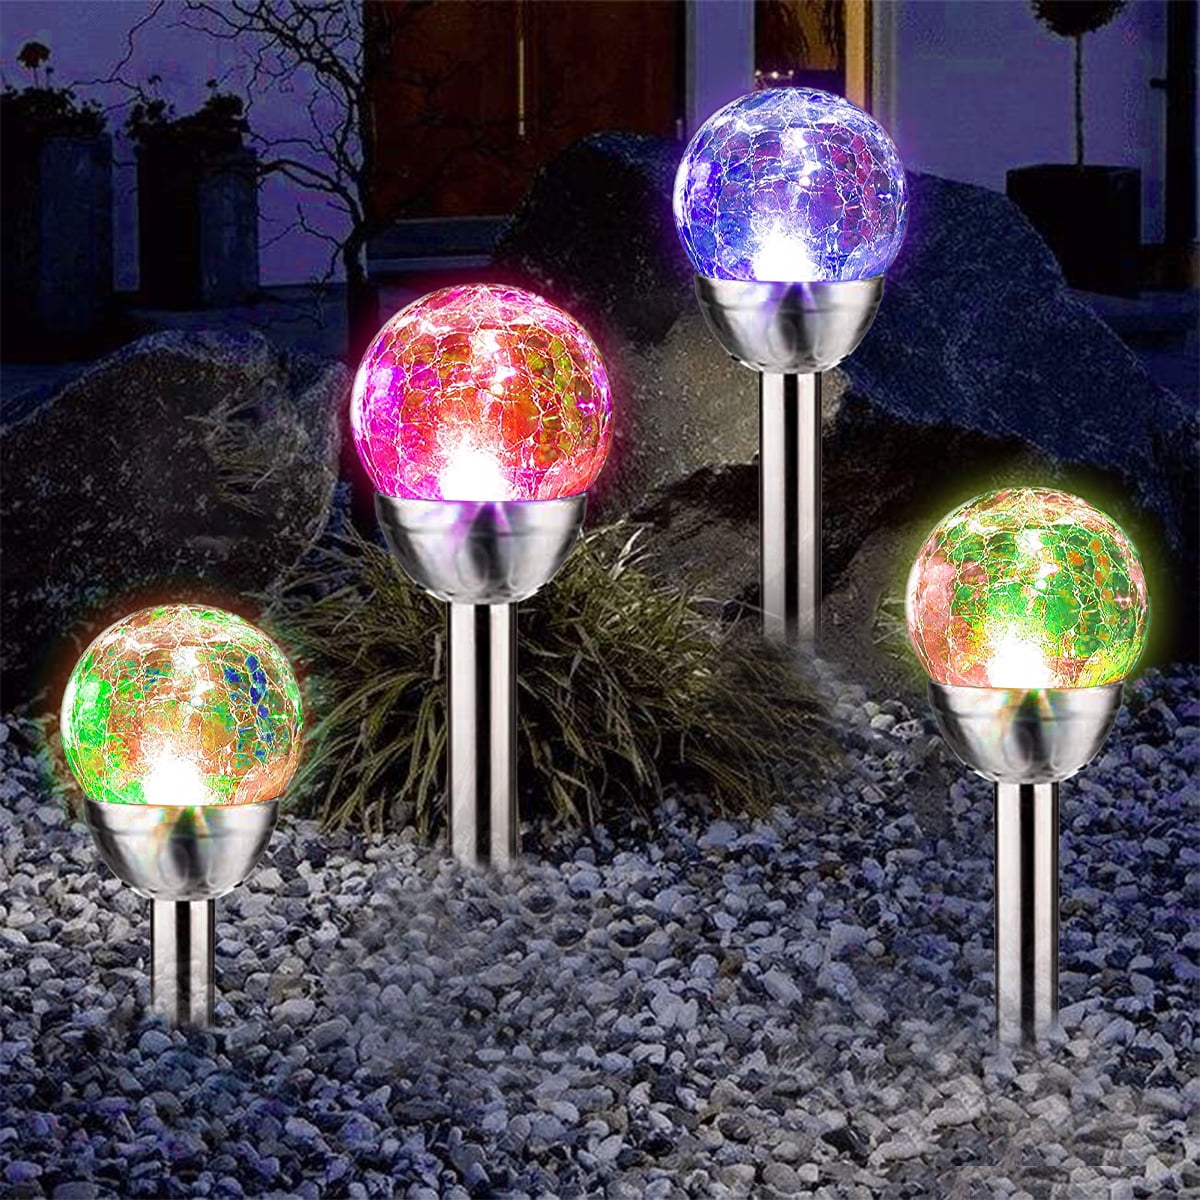 6 x Stainless Steel Colour Changing Solar Crackled Glass Ball Light Ice Orb New 